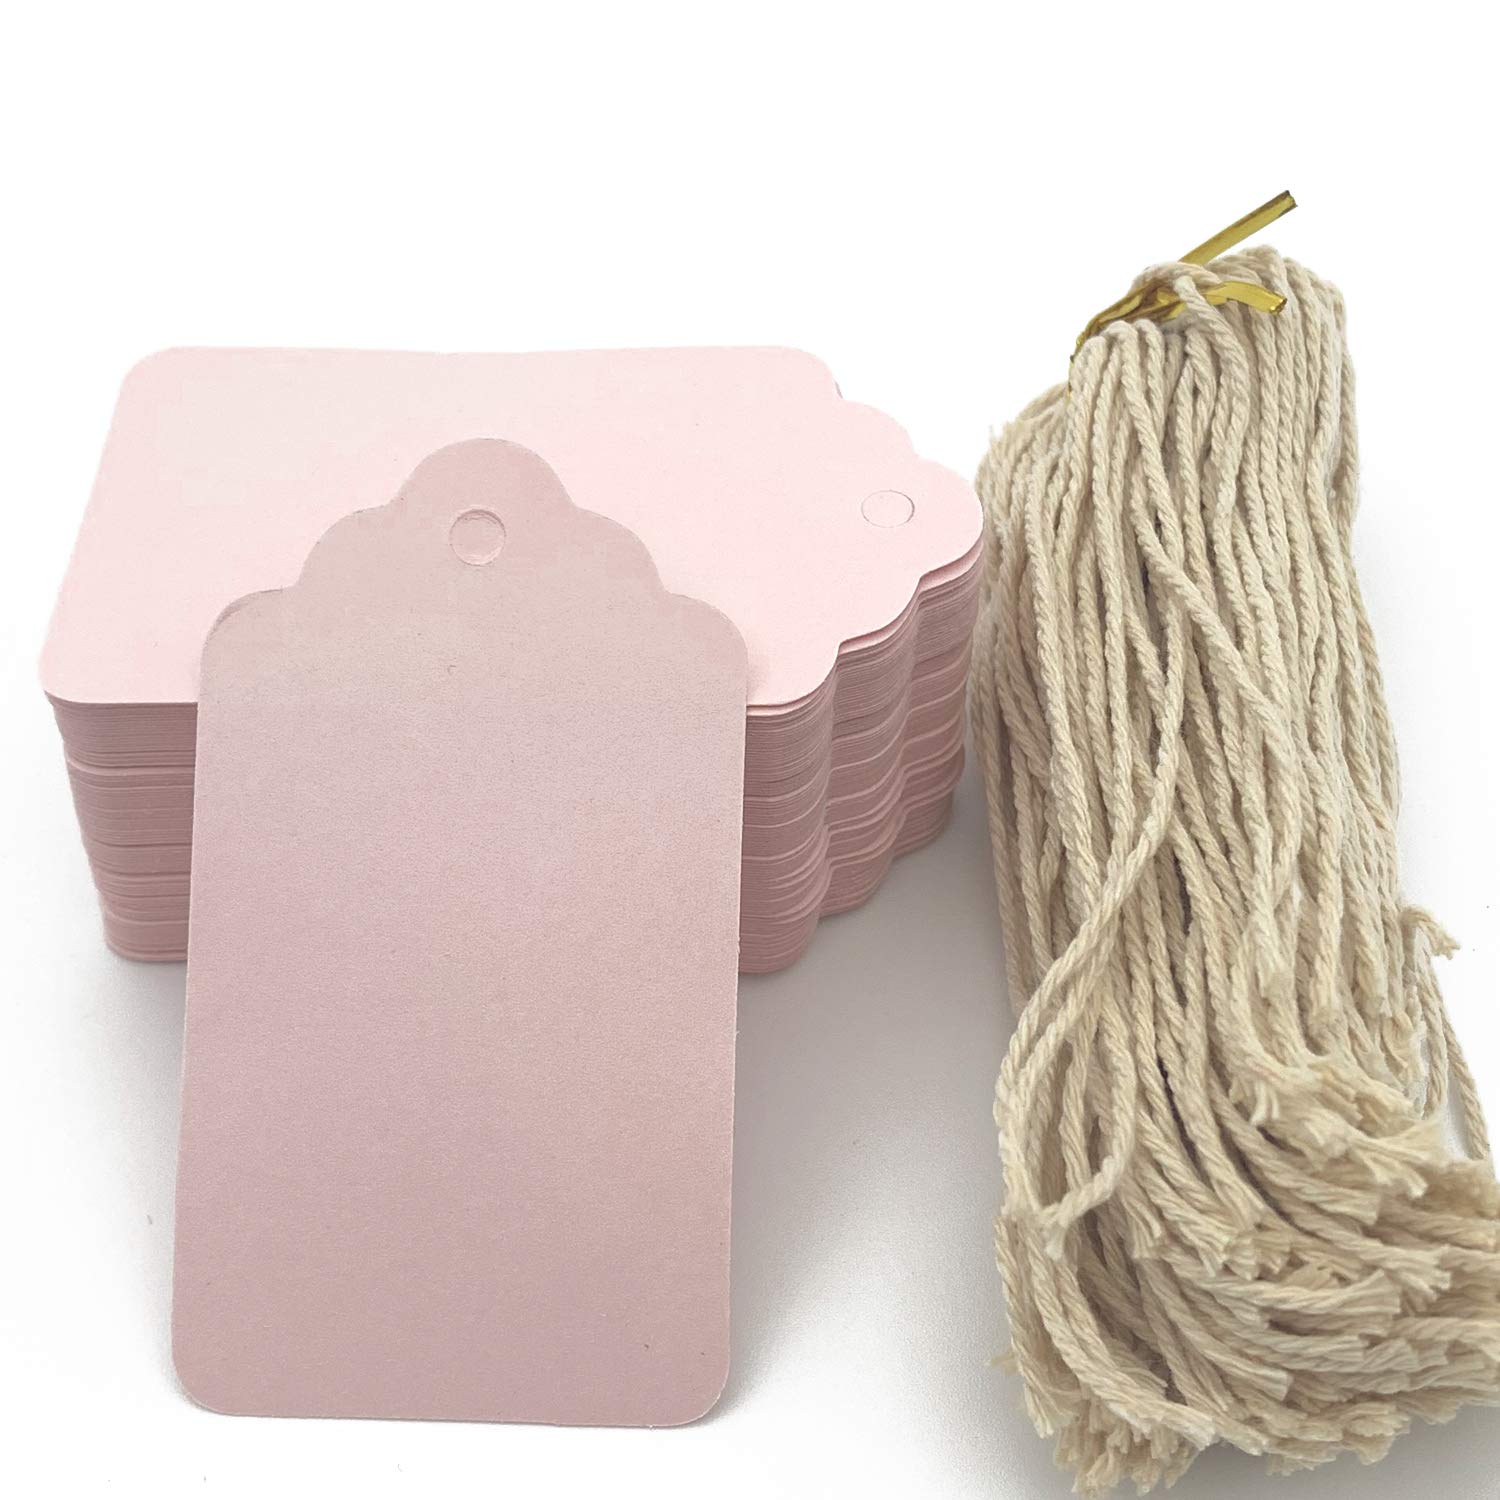 100pcs Pink Paper Hang Gift Tags, Blank Marking Tags with String for Baby  Shower Favors,Valentine's Day, Mother's Day and Craft Homemade Gifts